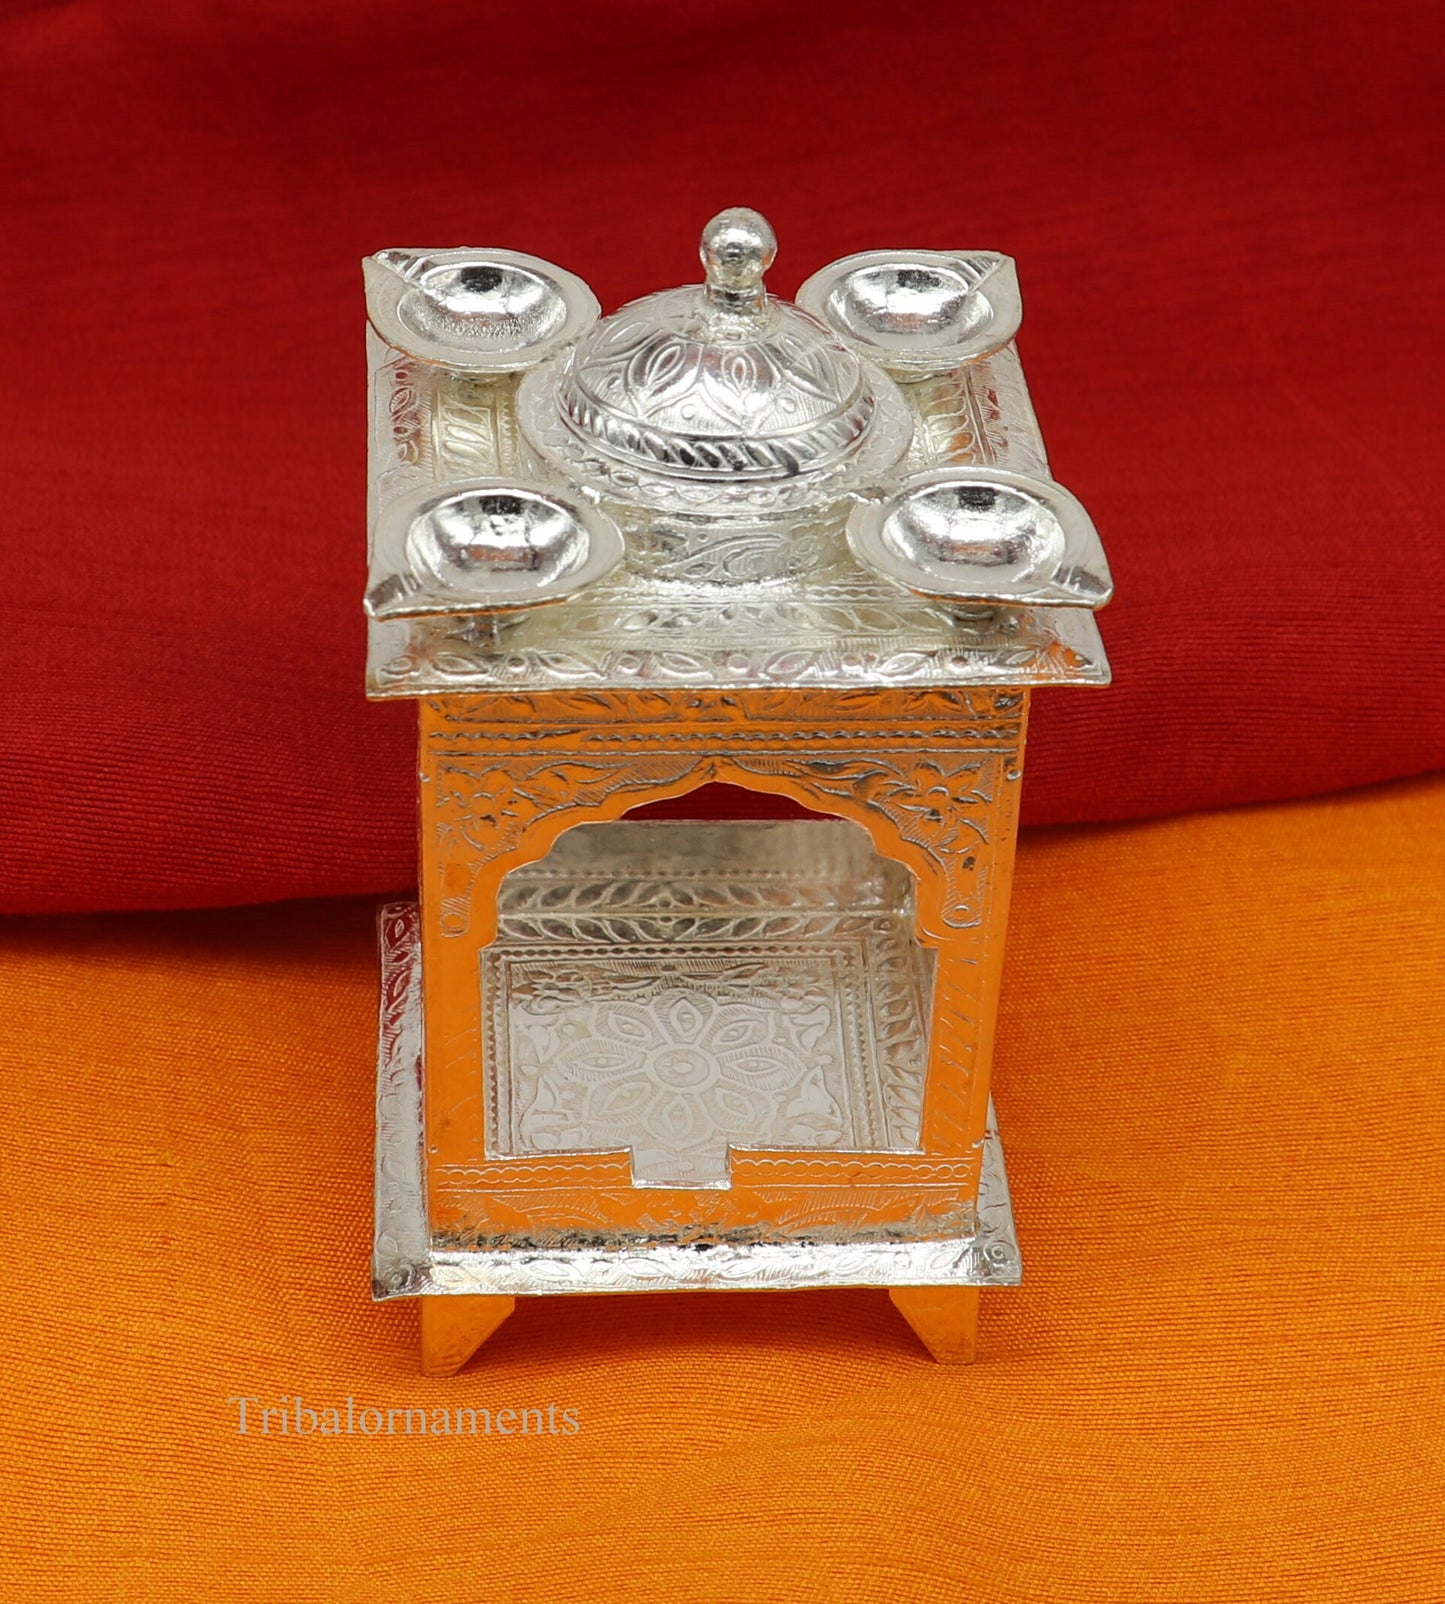 925 sterling silver handmade vintage antique design Hatri, best puja article with 5 lamp on it, best home temple decor utensils indiasu421 - TRIBAL ORNAMENTS